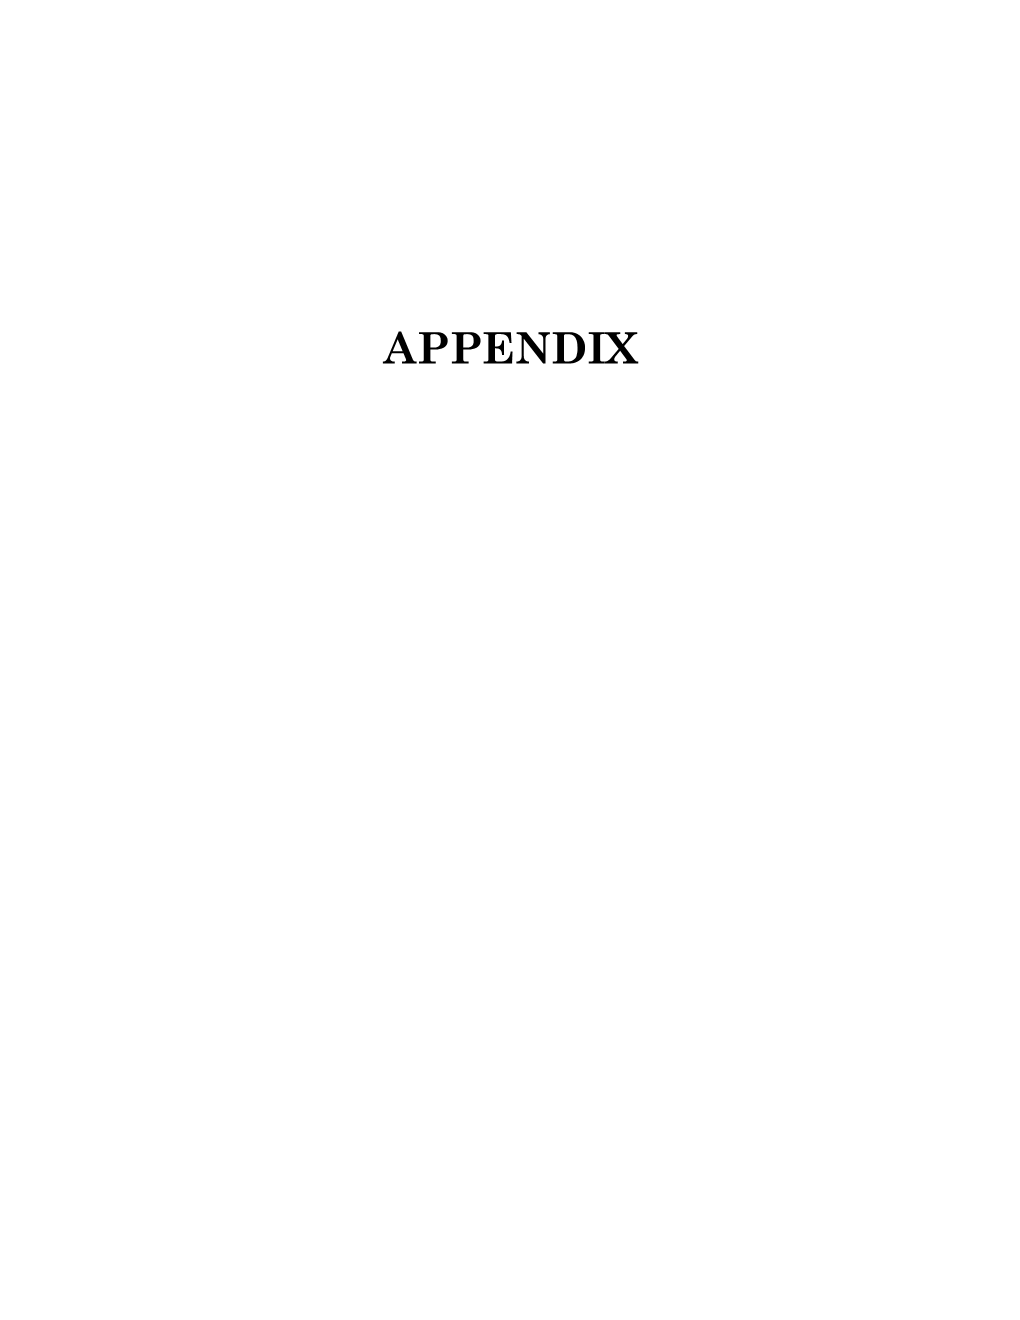 APPENDIX TABLE of APPENDICES Appendix a Opinion, United States Court of Appeals for the Second Circuit, Federal Housing Finance Agency V